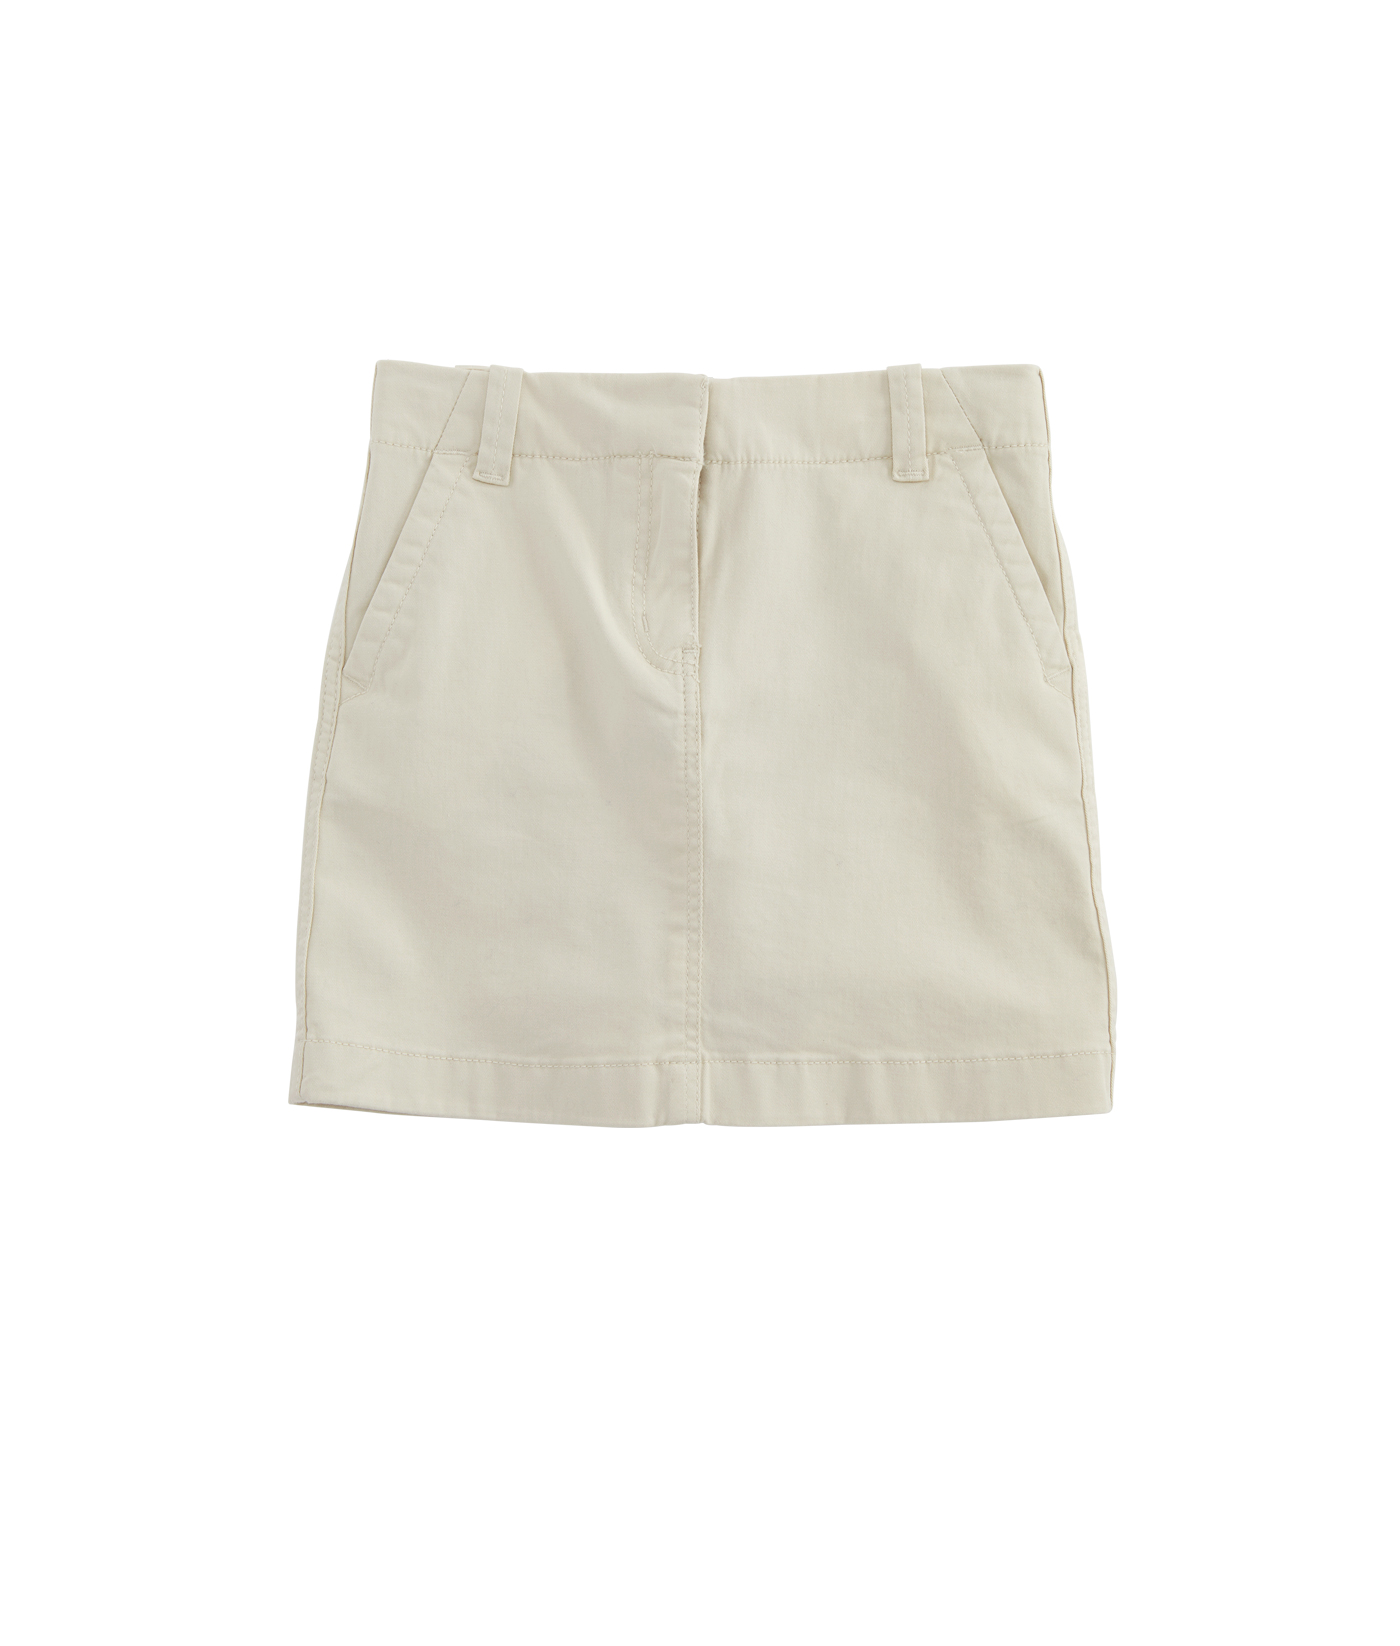 Shop Girls Solid Every Day Skirt at vineyard vines